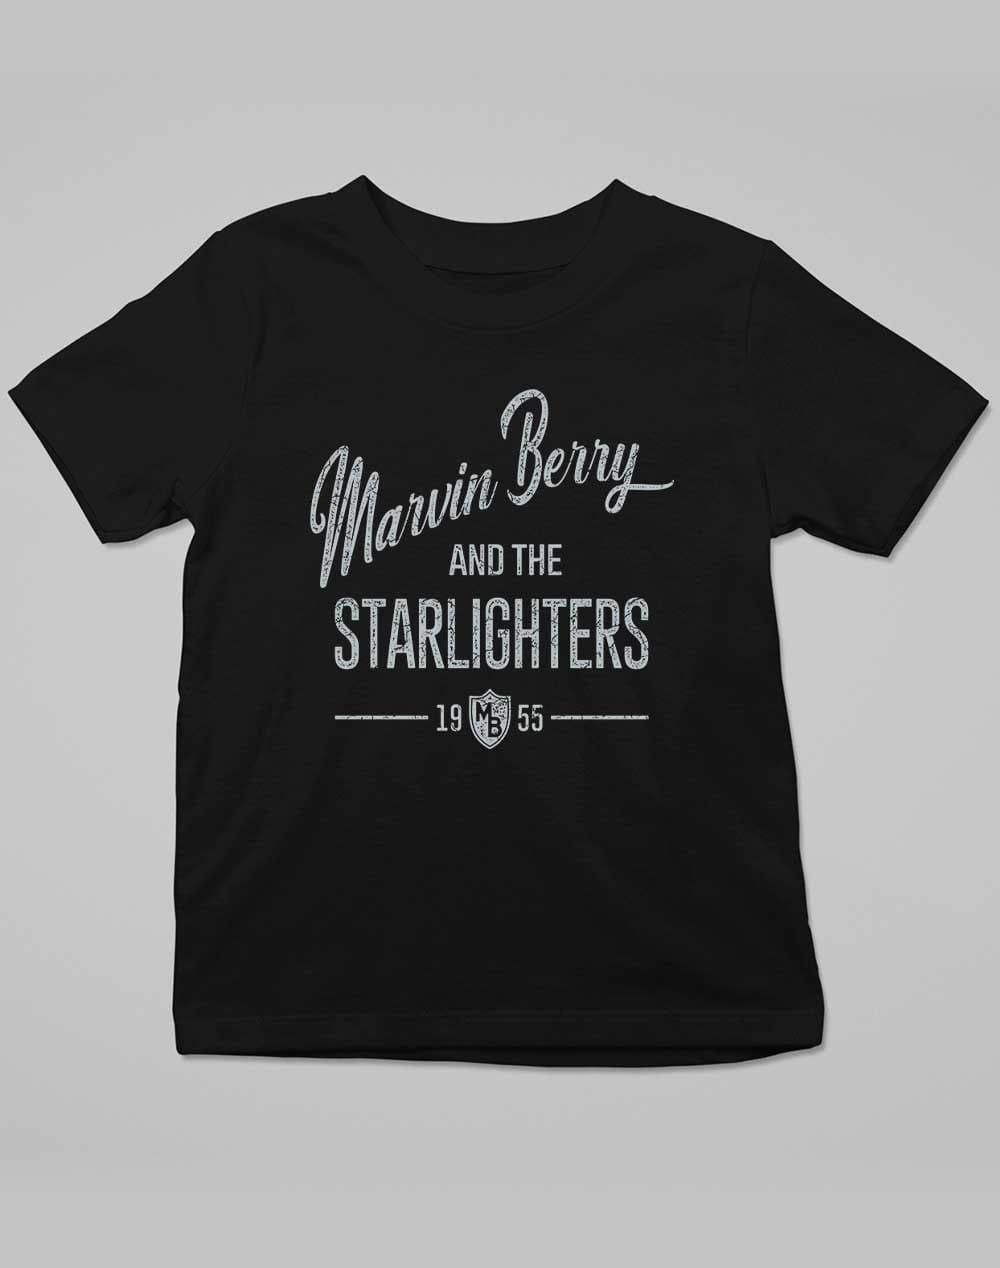 Marvin Berry and the Starlighters Kids T-Shirt 3-4 years / Deep Black  - Off World Tees